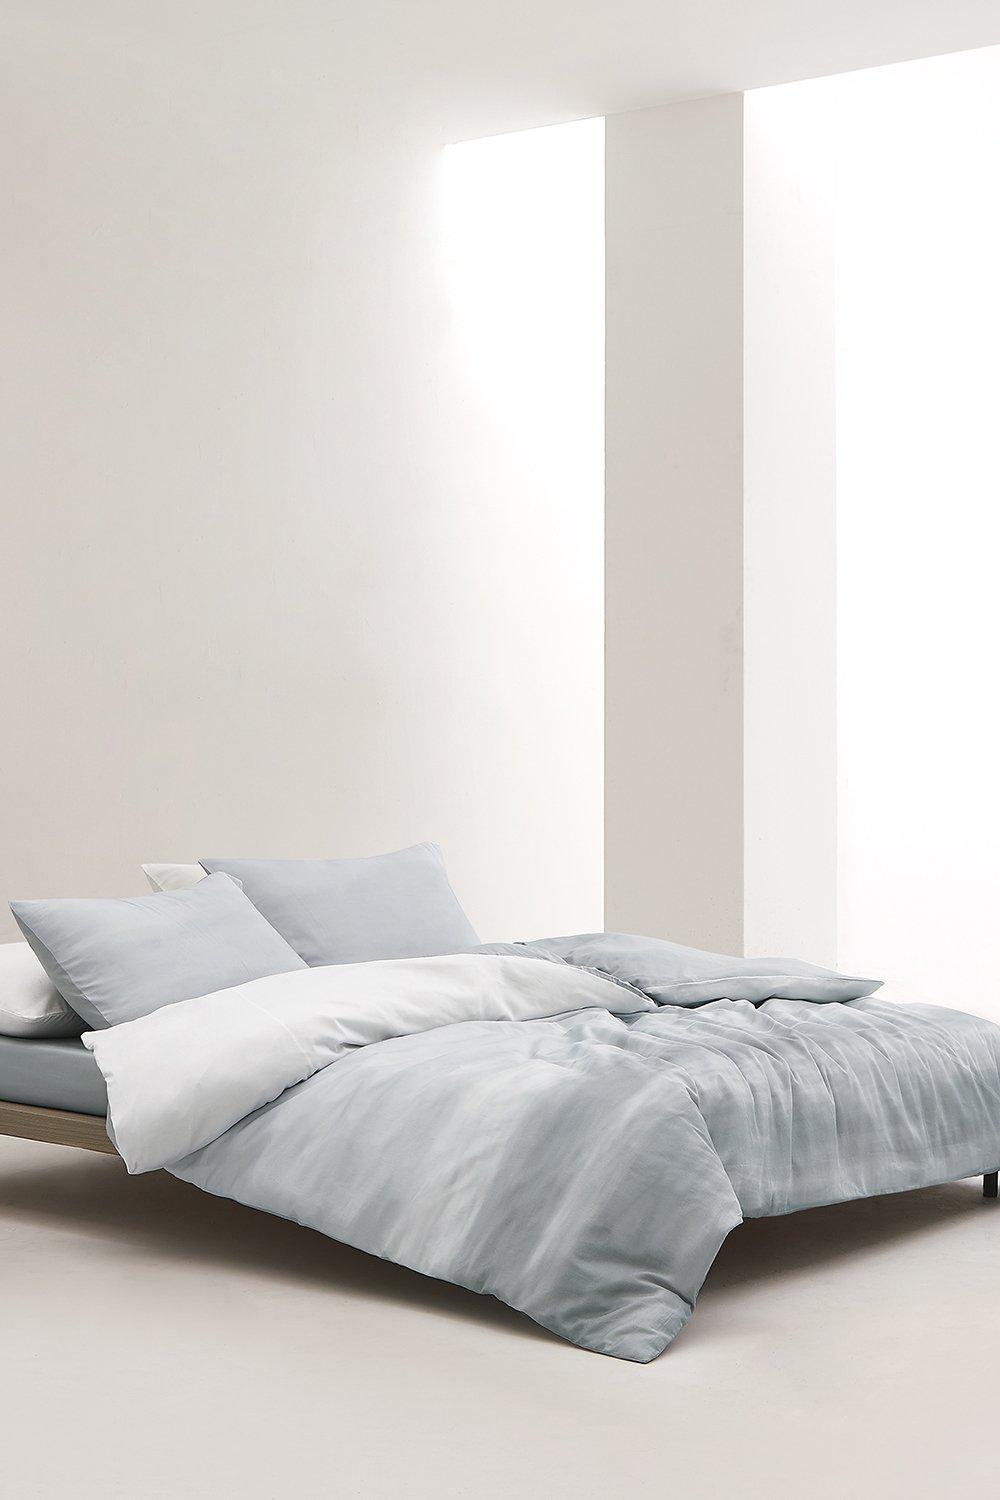 'Silver Lining Cotton Sateen' Duvet Cover